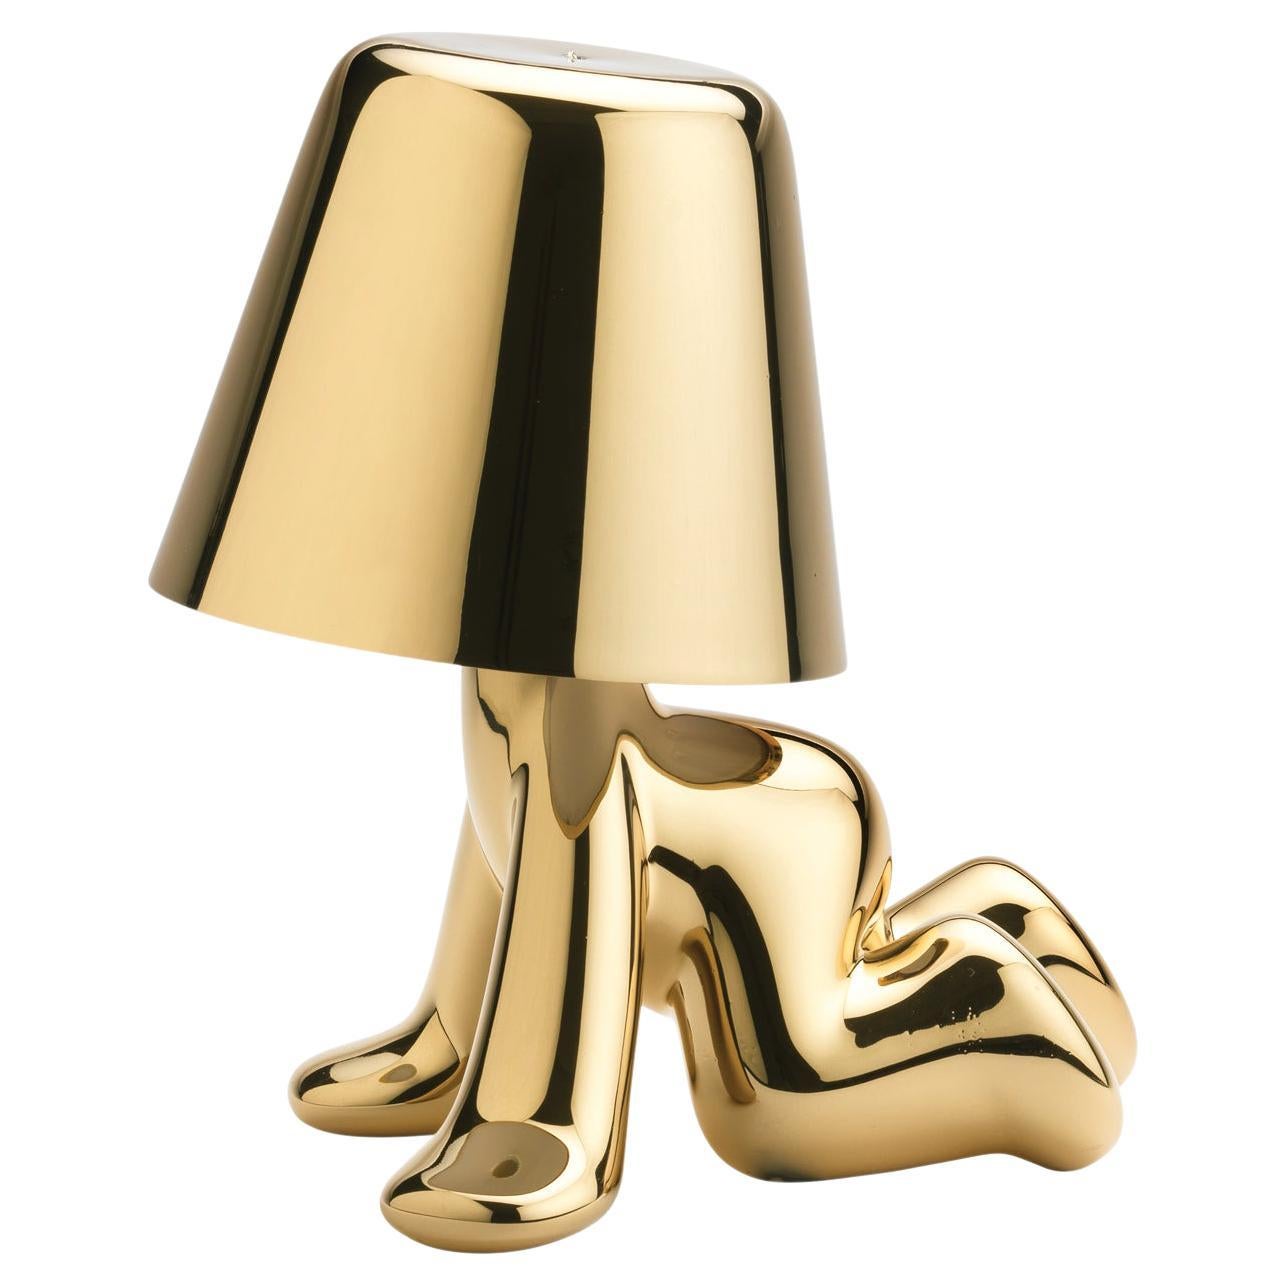 Golden Brothers Ron LED Lamp, Designed by Stefano Giovannoni, Made in Italy